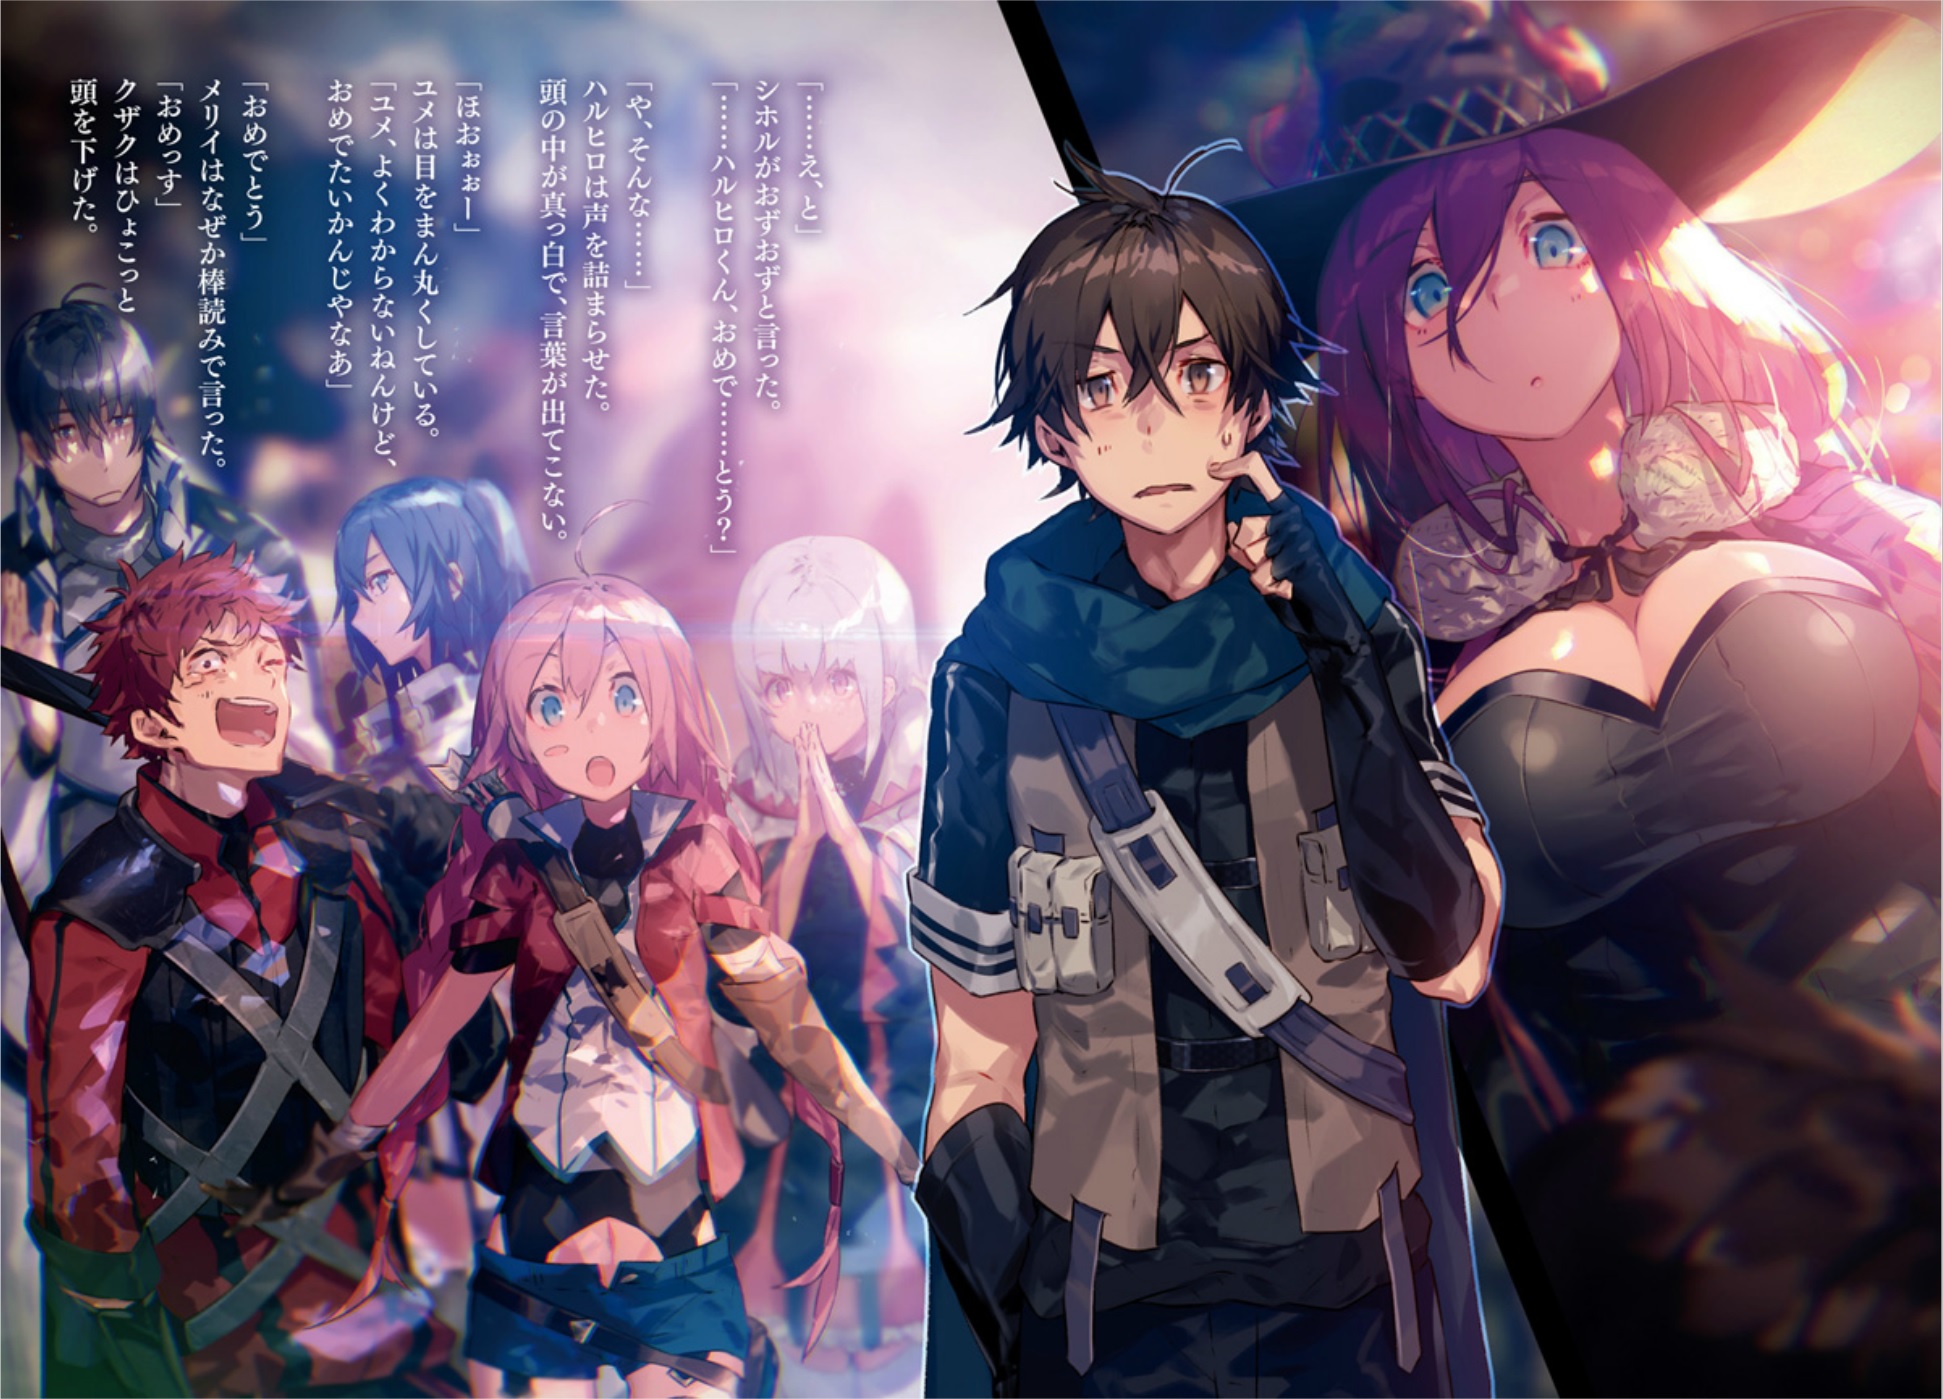 Anime Grimgar of Fantasy and Ash HD Wallpaper Background Image. 